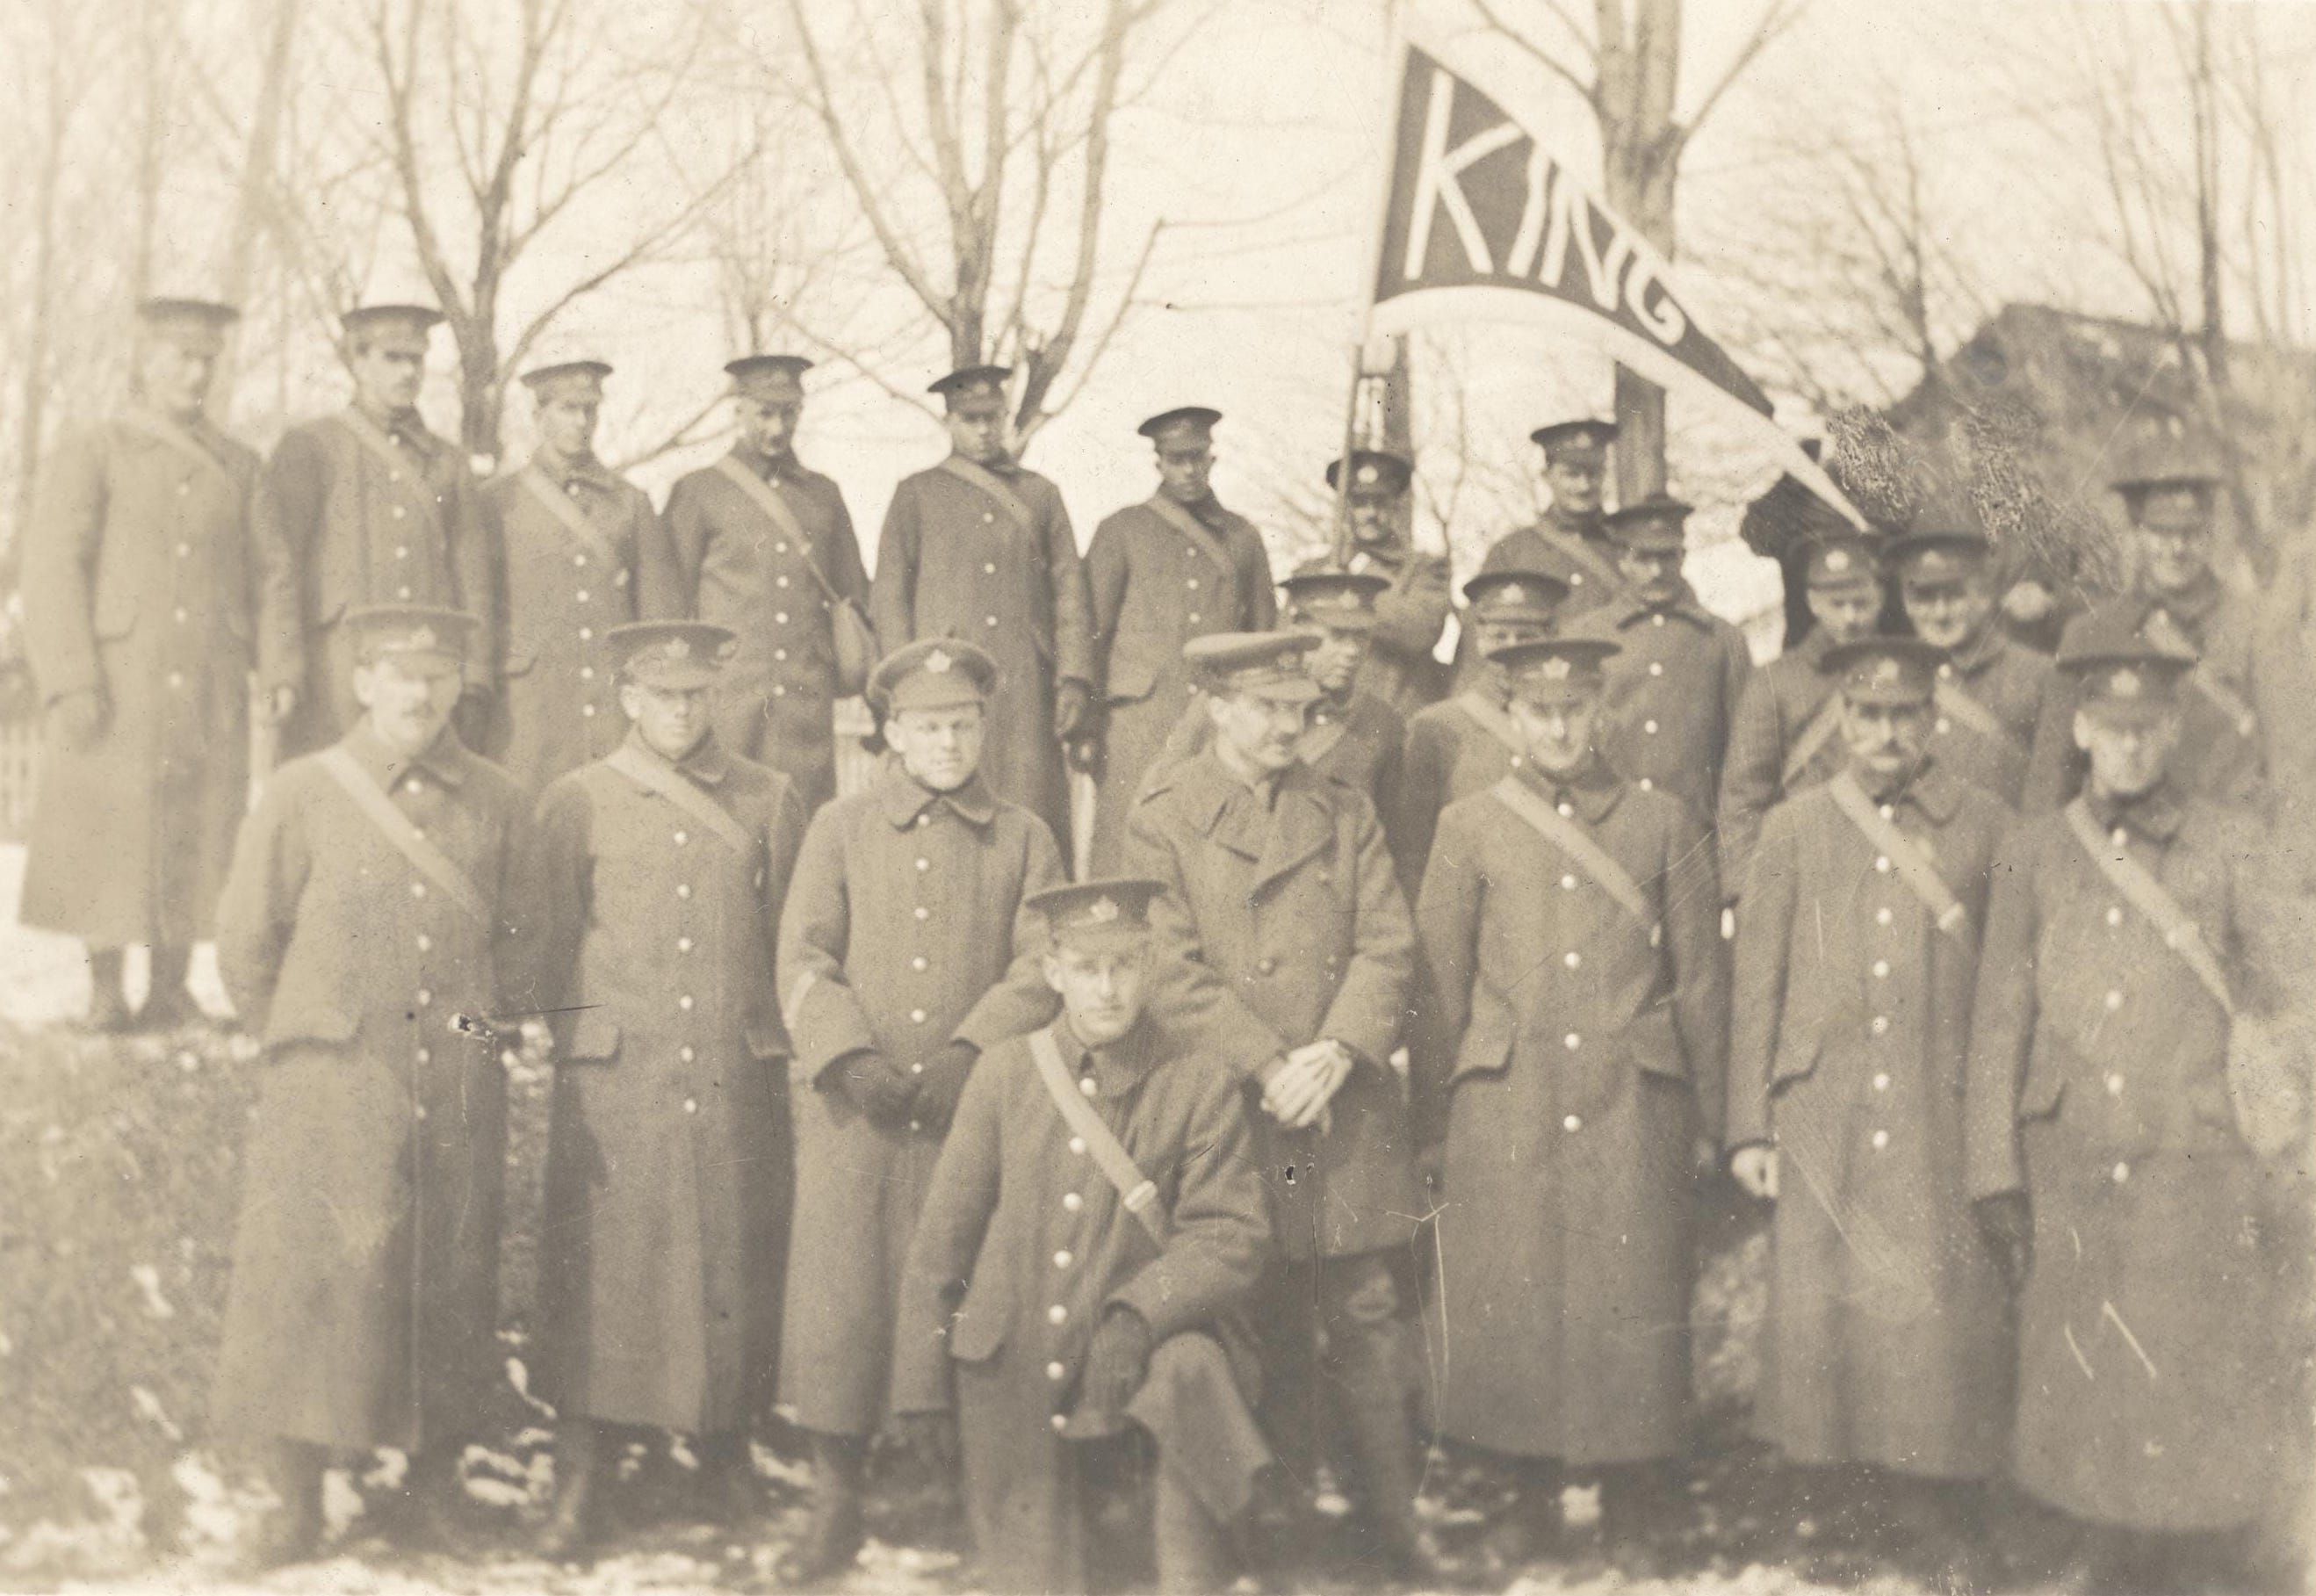 Black and white photograph of soldiers with King Township banner